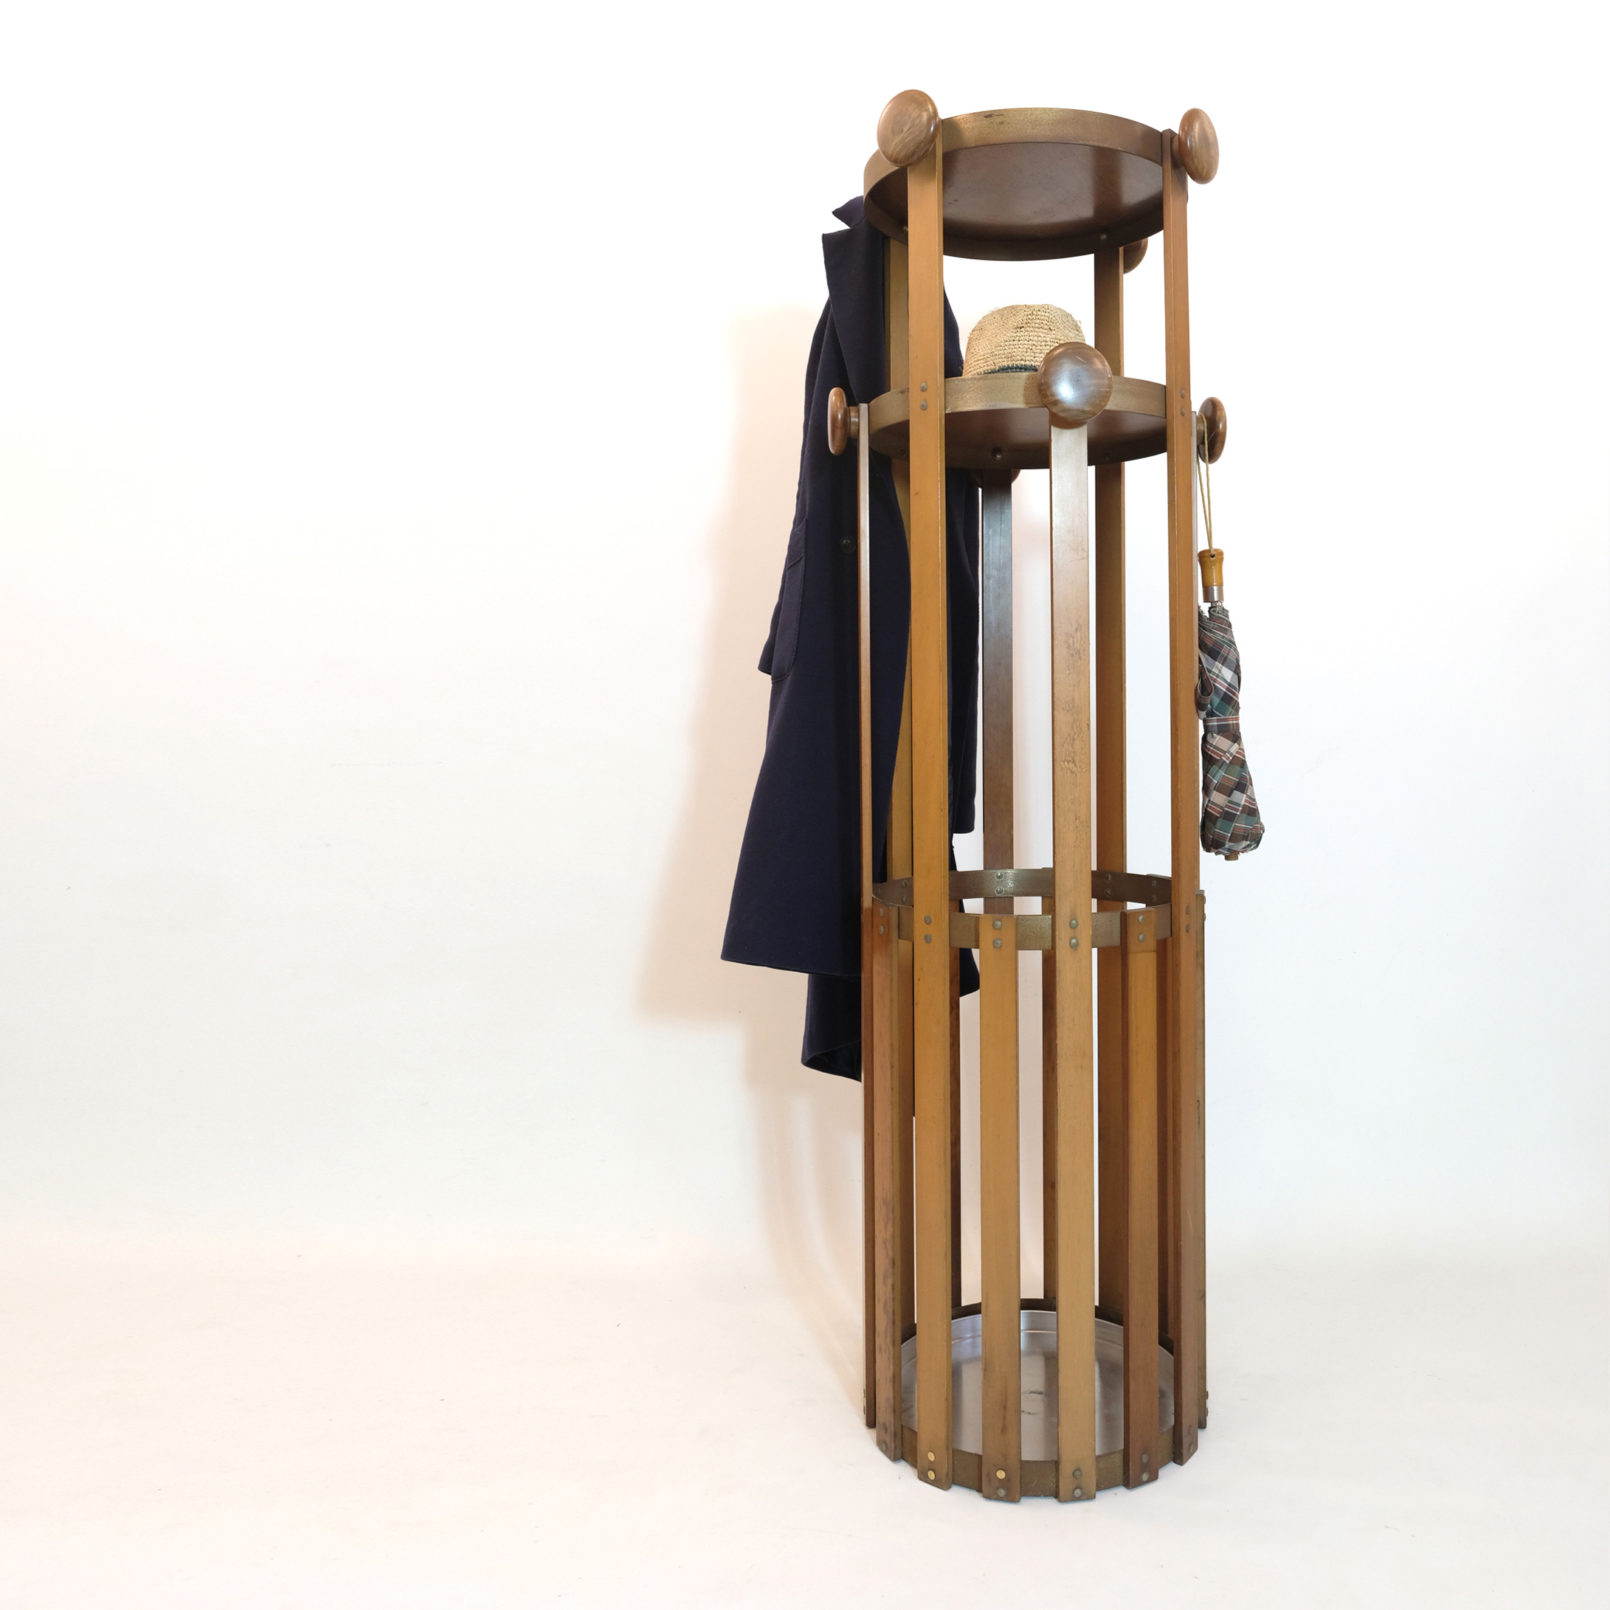 Large Italian coat and umbrella rack from the sixties.